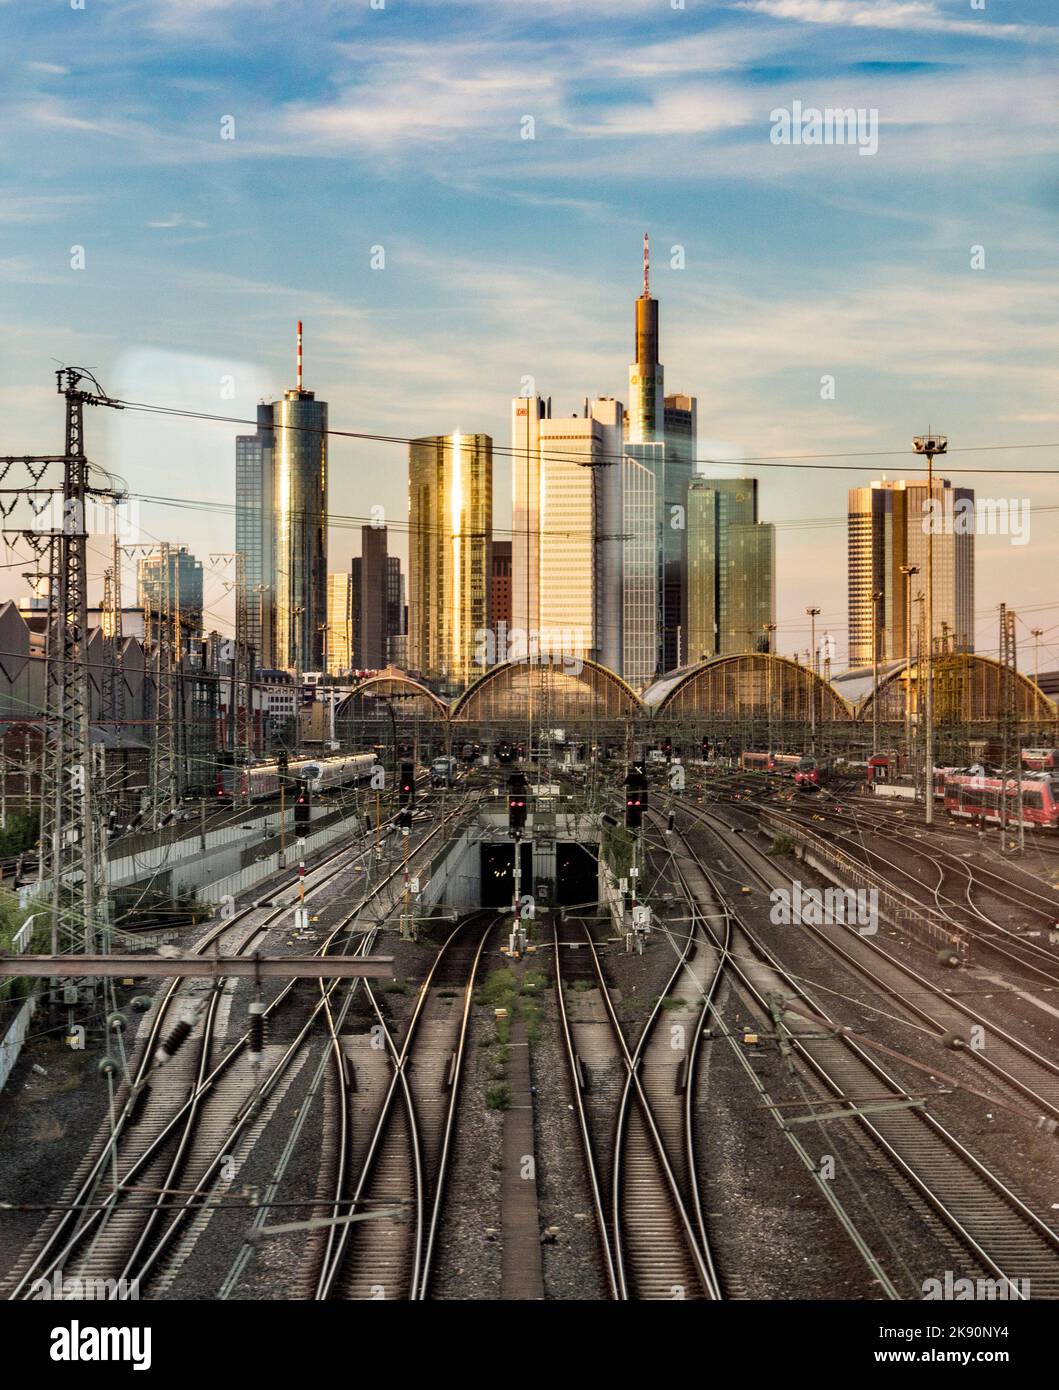 FRANKFURT, GERMANY - JULY 7, 2016: entrance of central station in Frankfurt, Germany. With about 350,000 passengers per day the station is the most fr Stock Photo